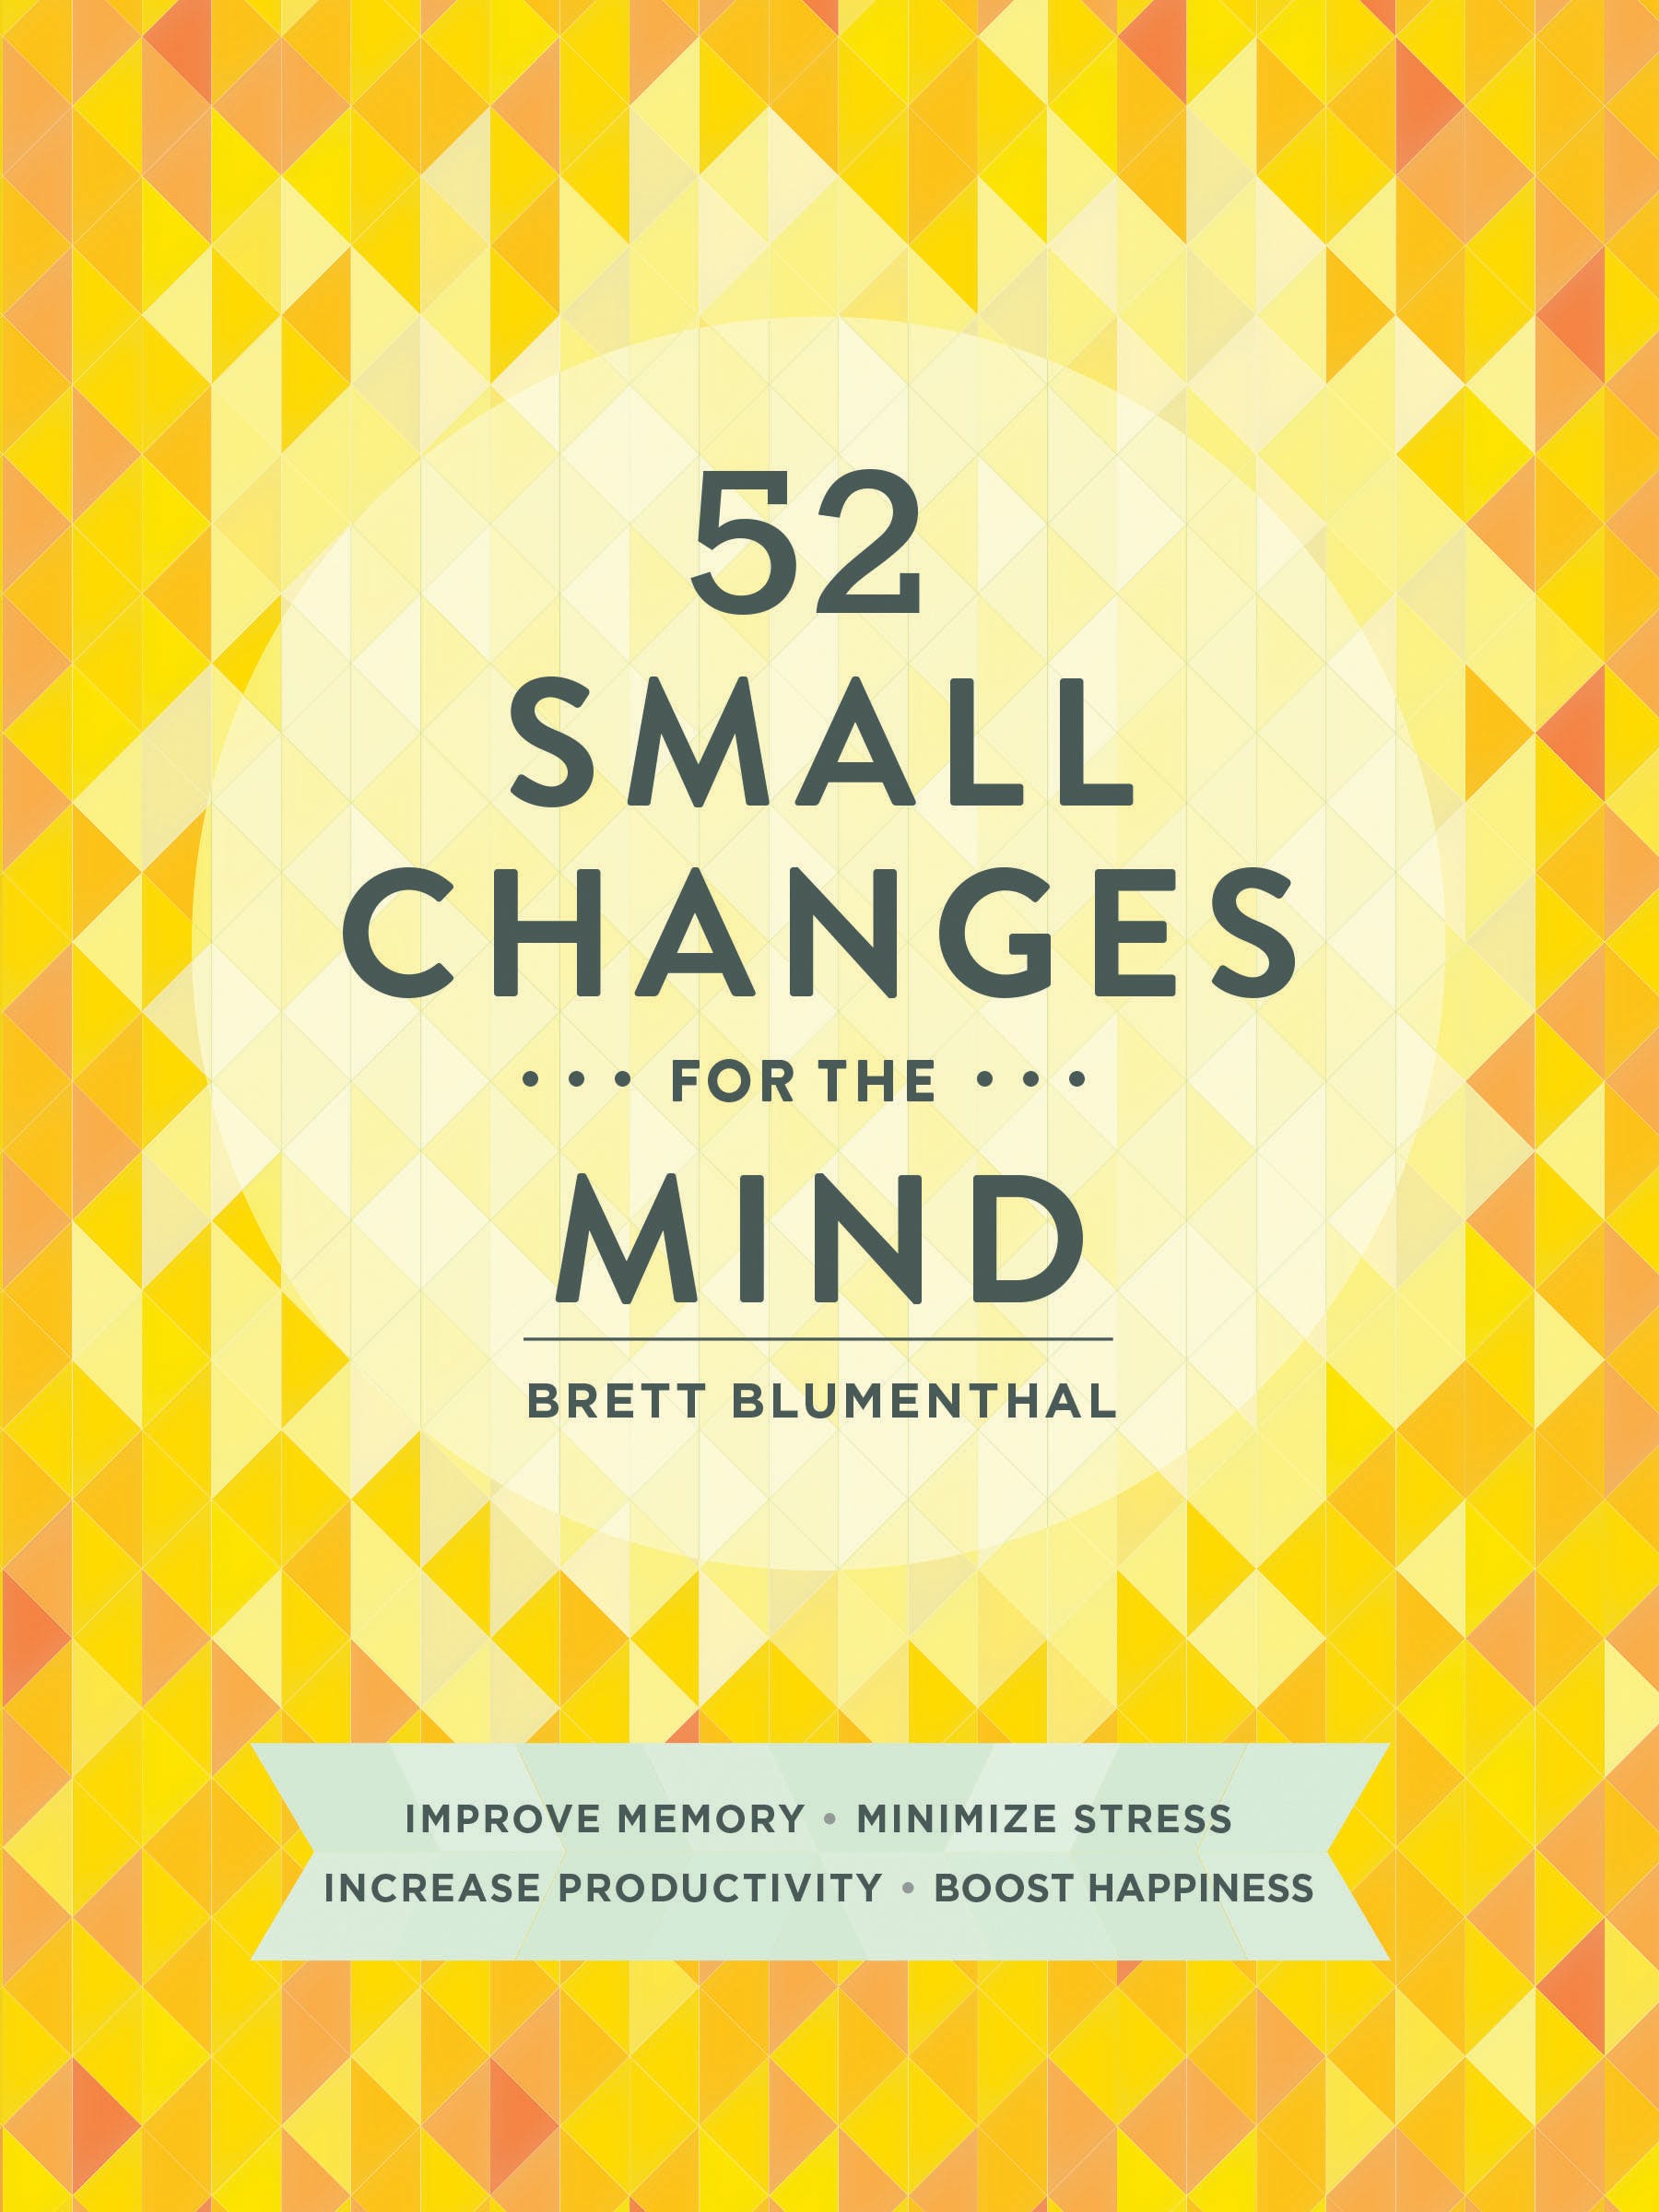 52 Small Changes for the Mind media 2